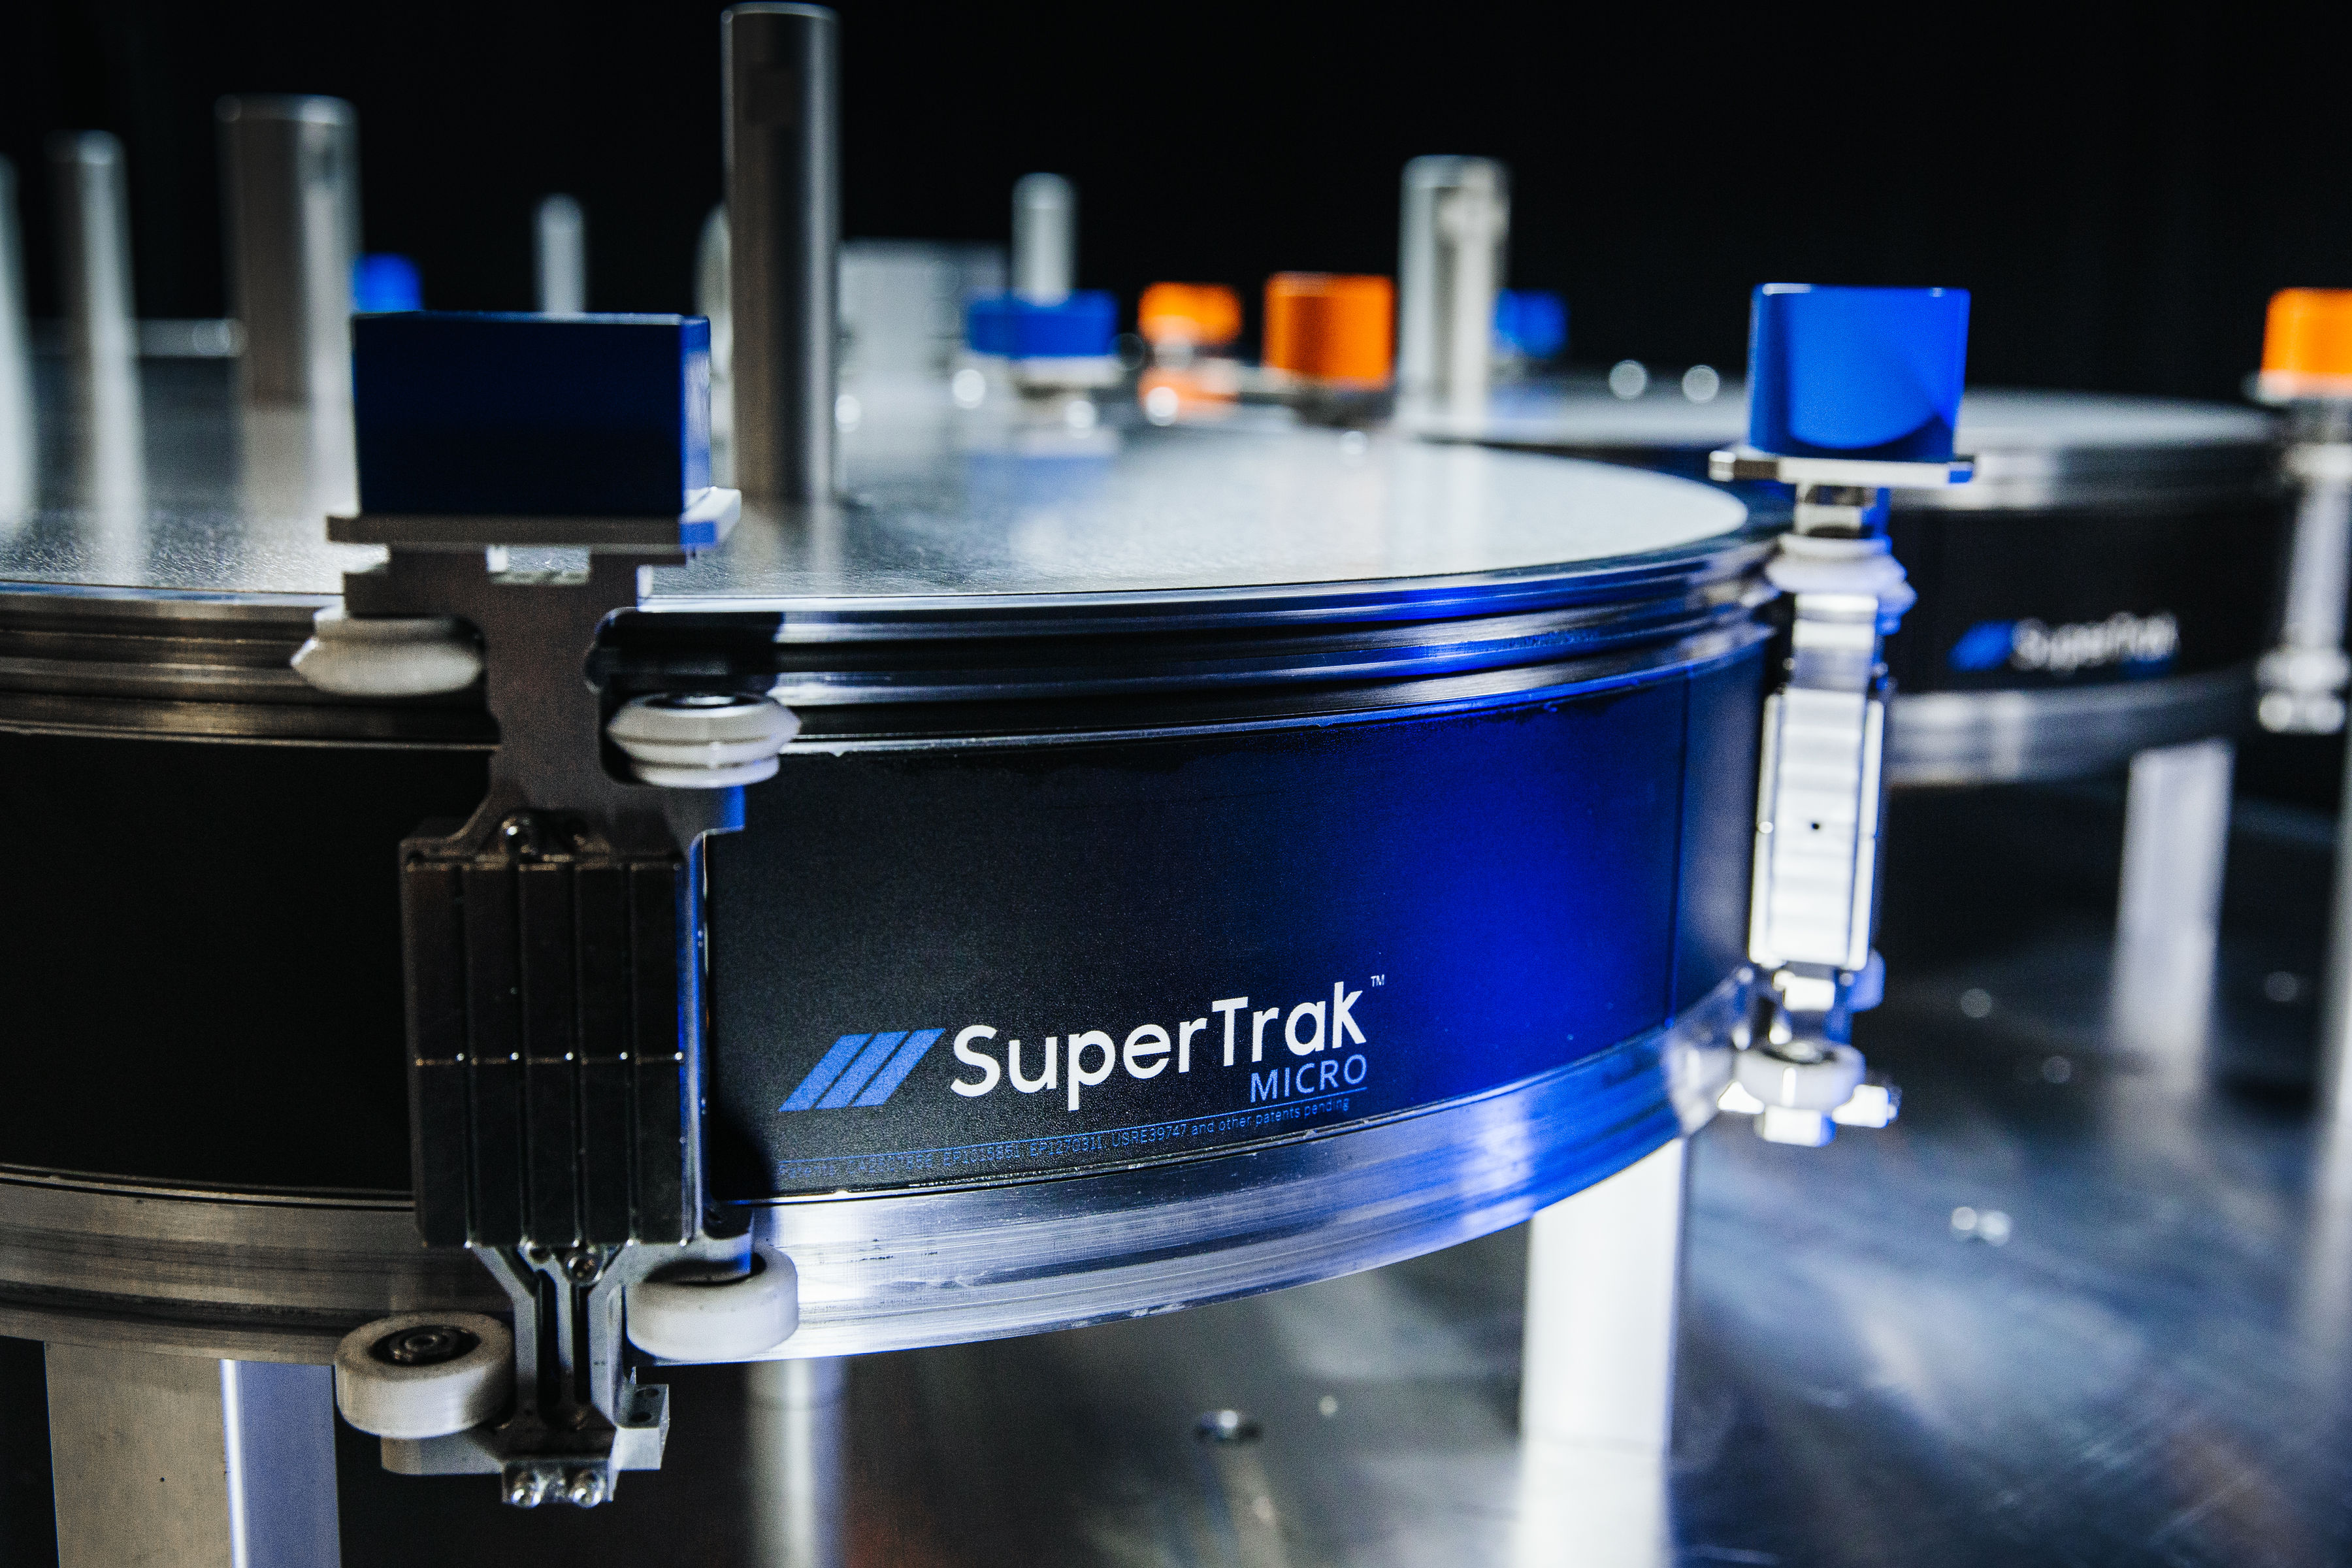 Close up view of SuperTrak MICRO™ at an end curve